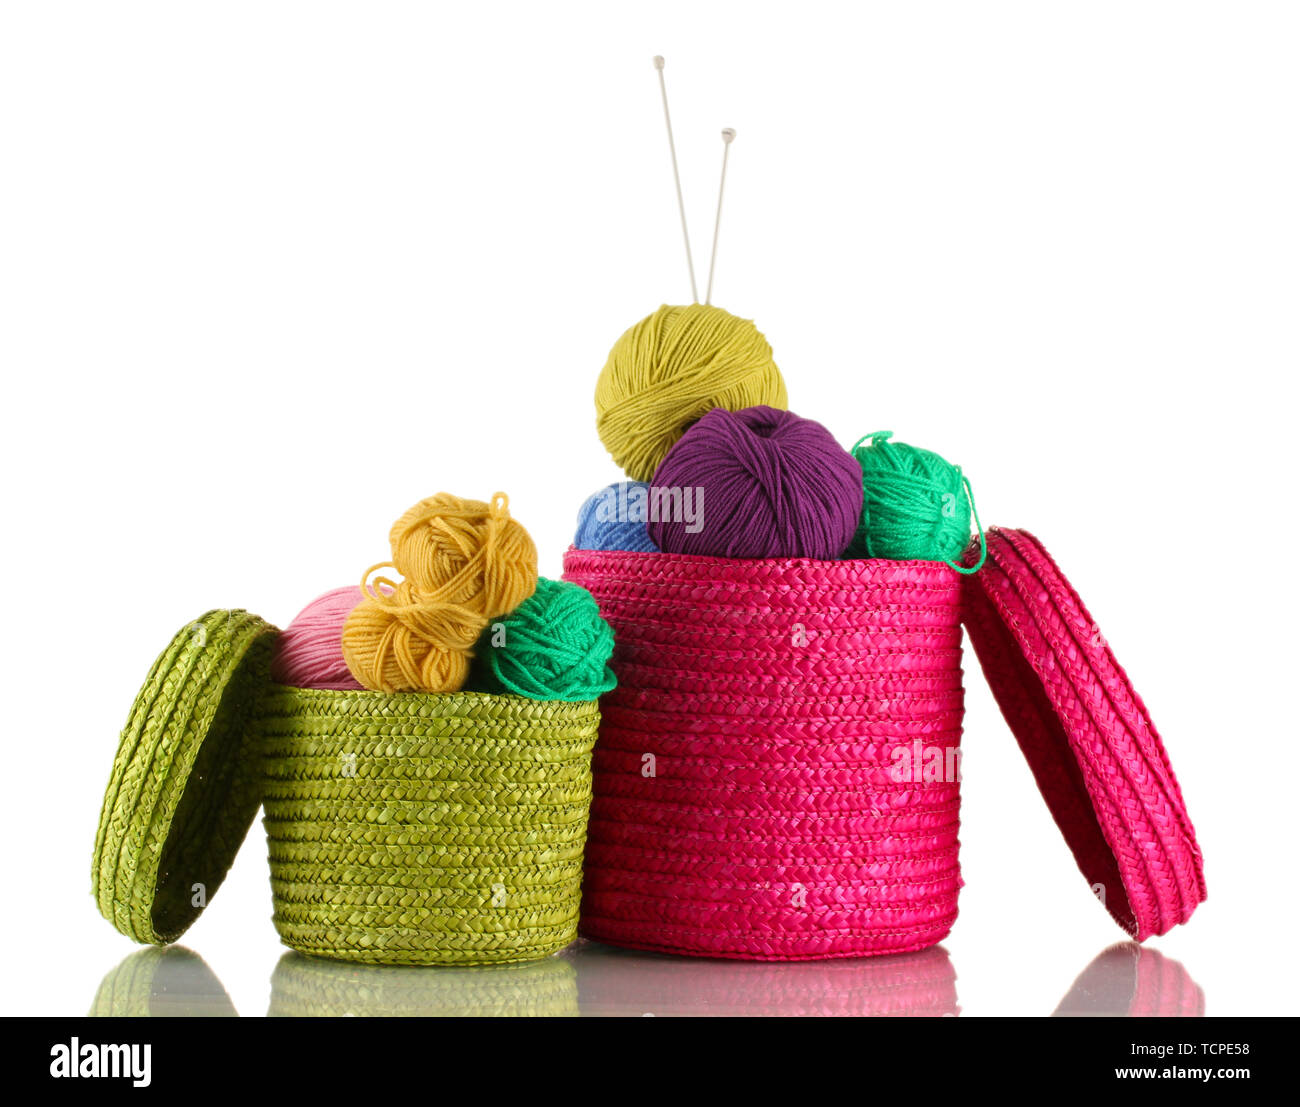 Knitted fabric of very thick yarn. A big tangle. The background is